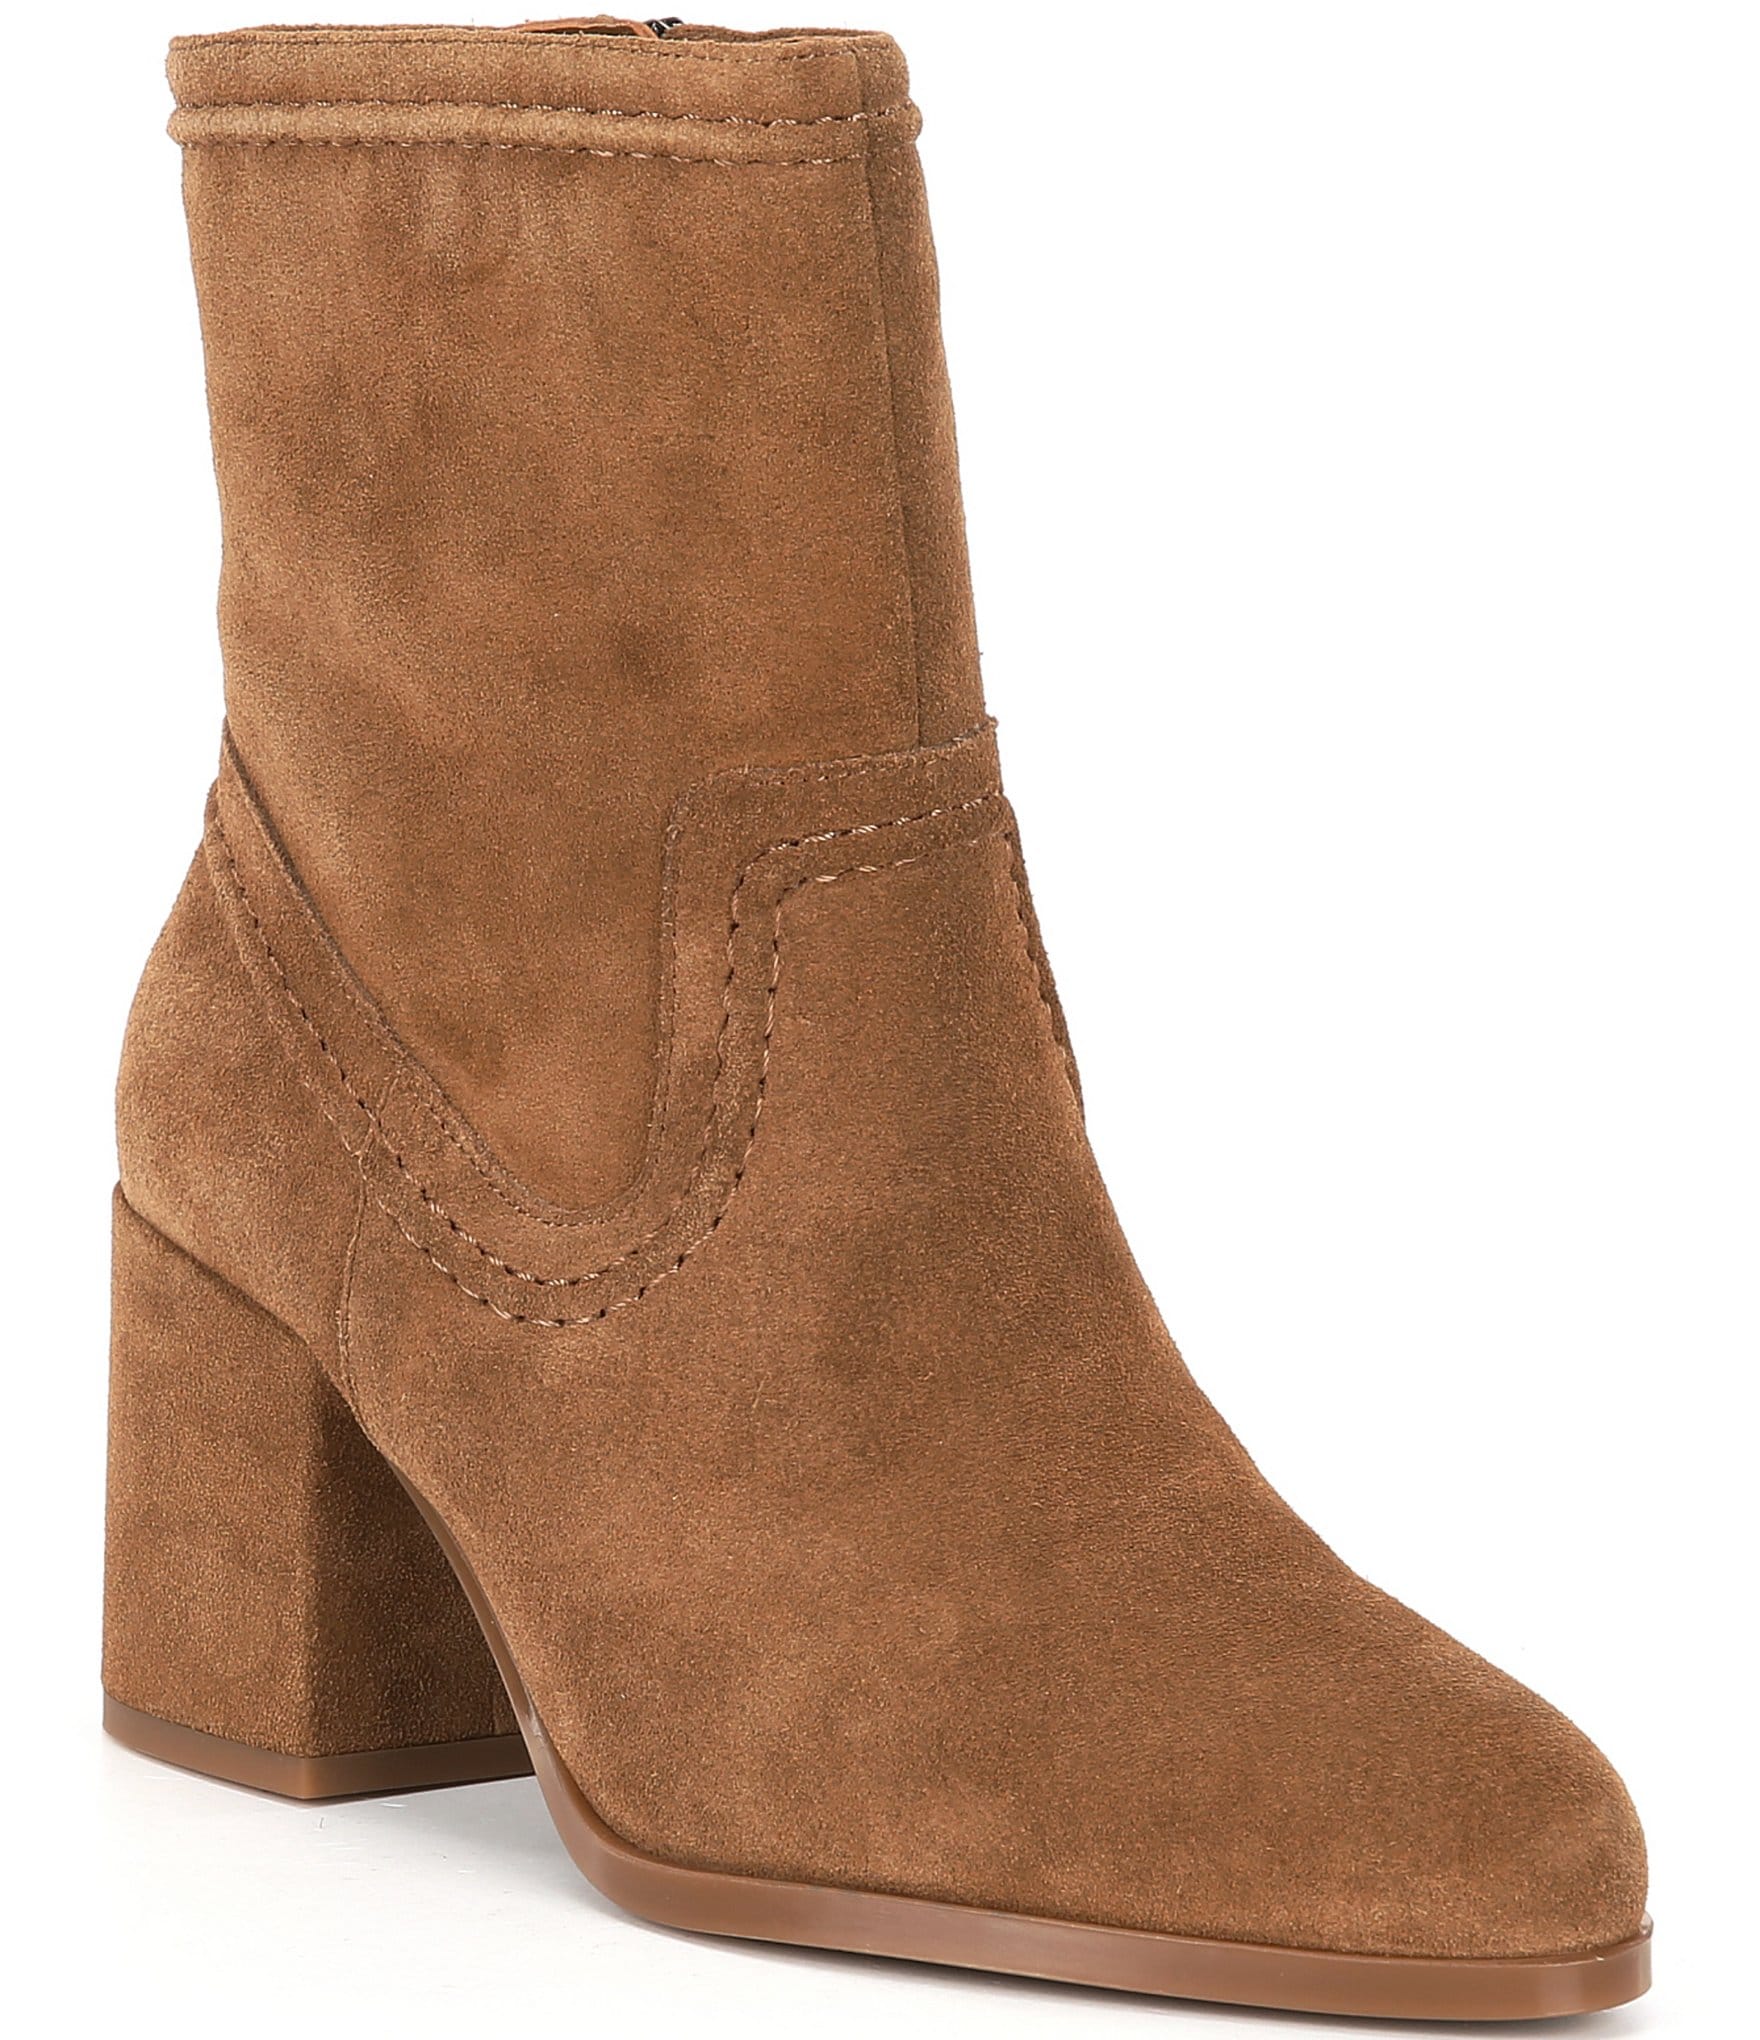 Vince Camuto Pailey Suede Booties